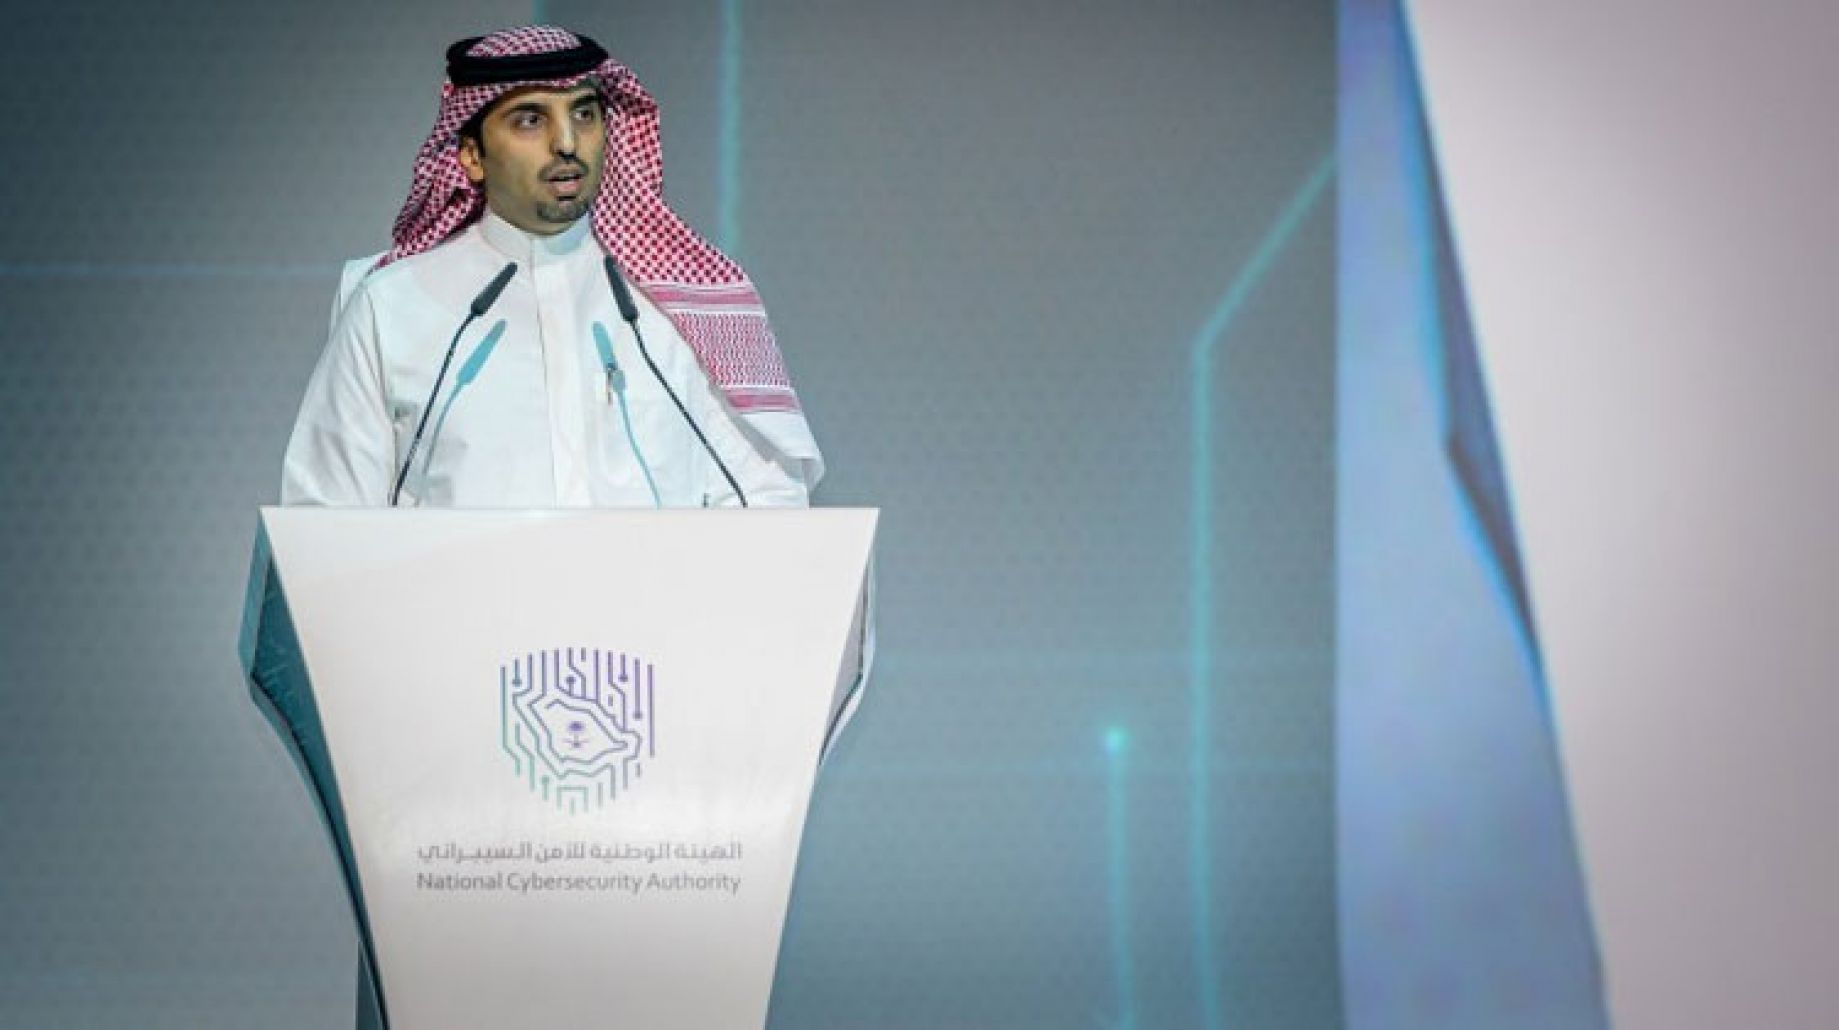 International Cybersecurity Forum Kicks off in Riyadh with Participation of Over 100 Countries